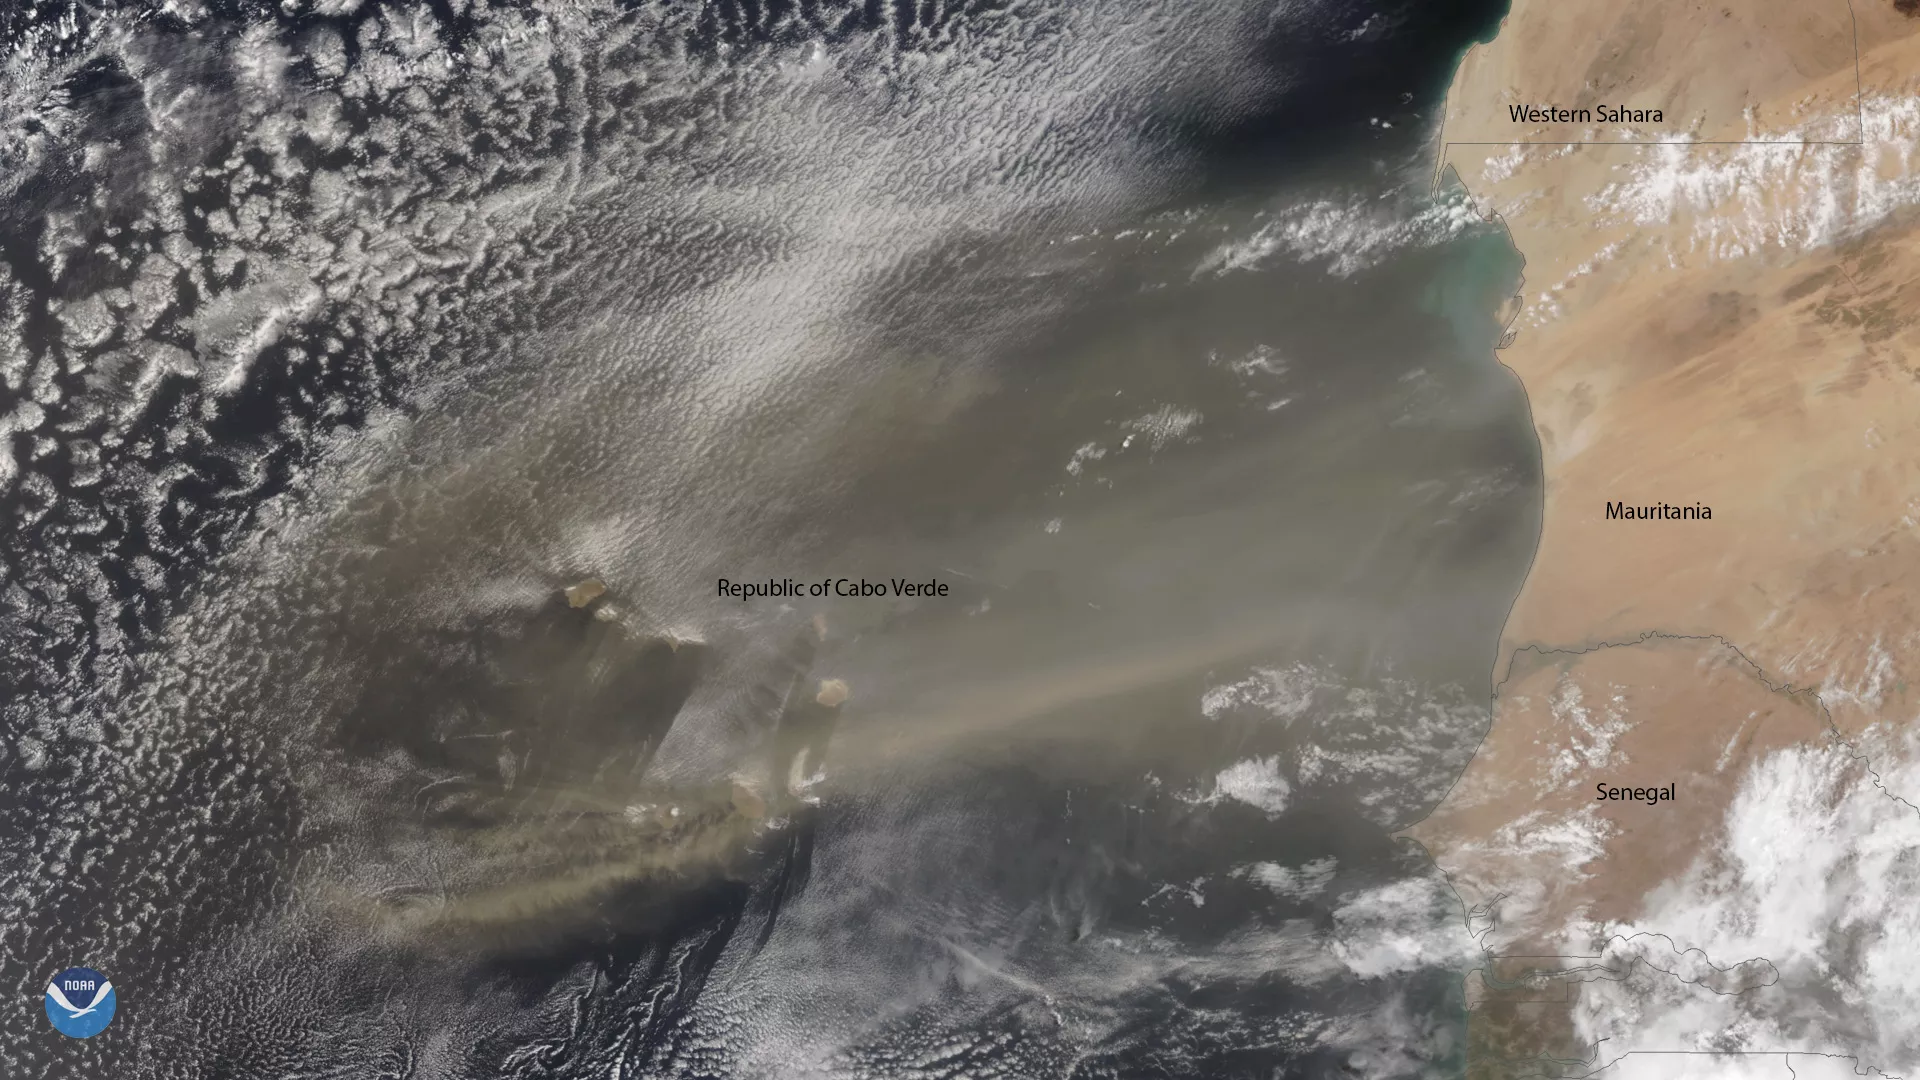 A plume of Saharan dust reaching beyond the Republic of Cabo Verde